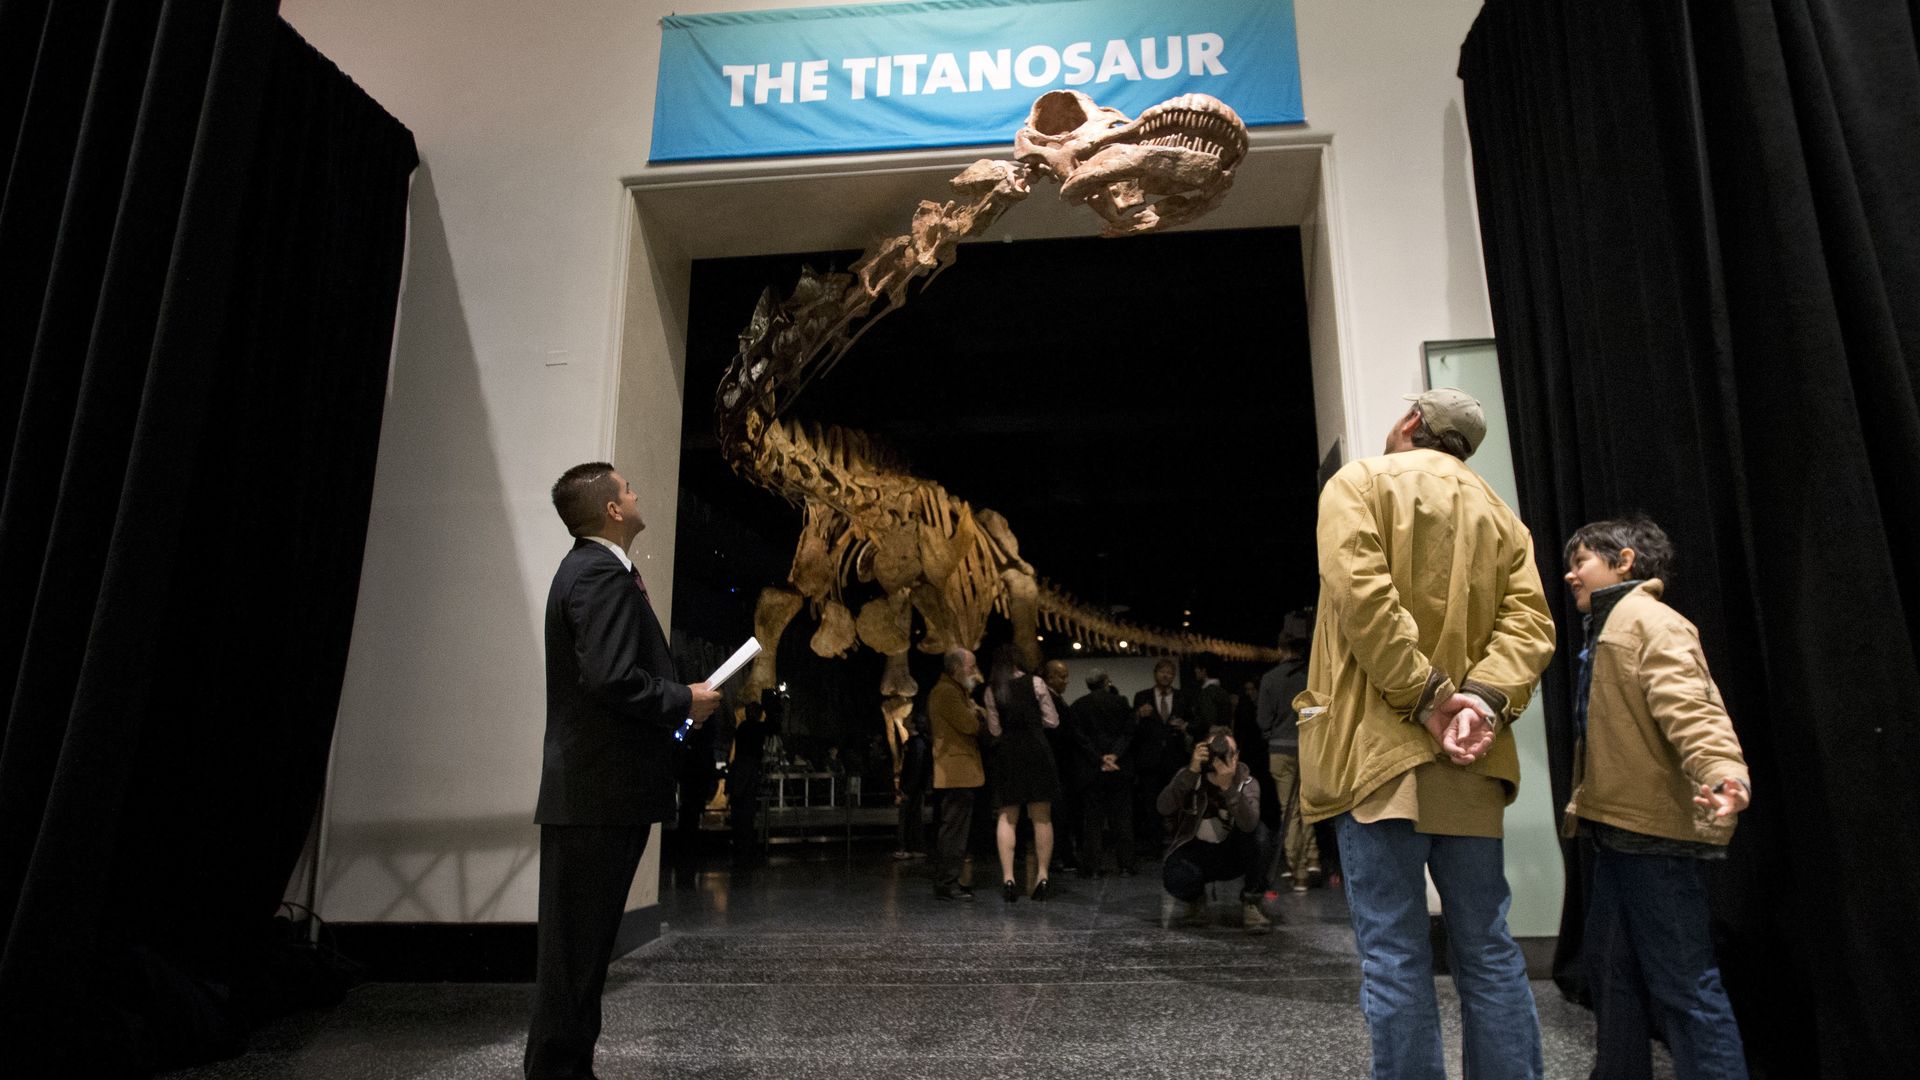 Visitors to the American Museum of Natural History examining a replica of a 122-foot-long dinosaur on display.